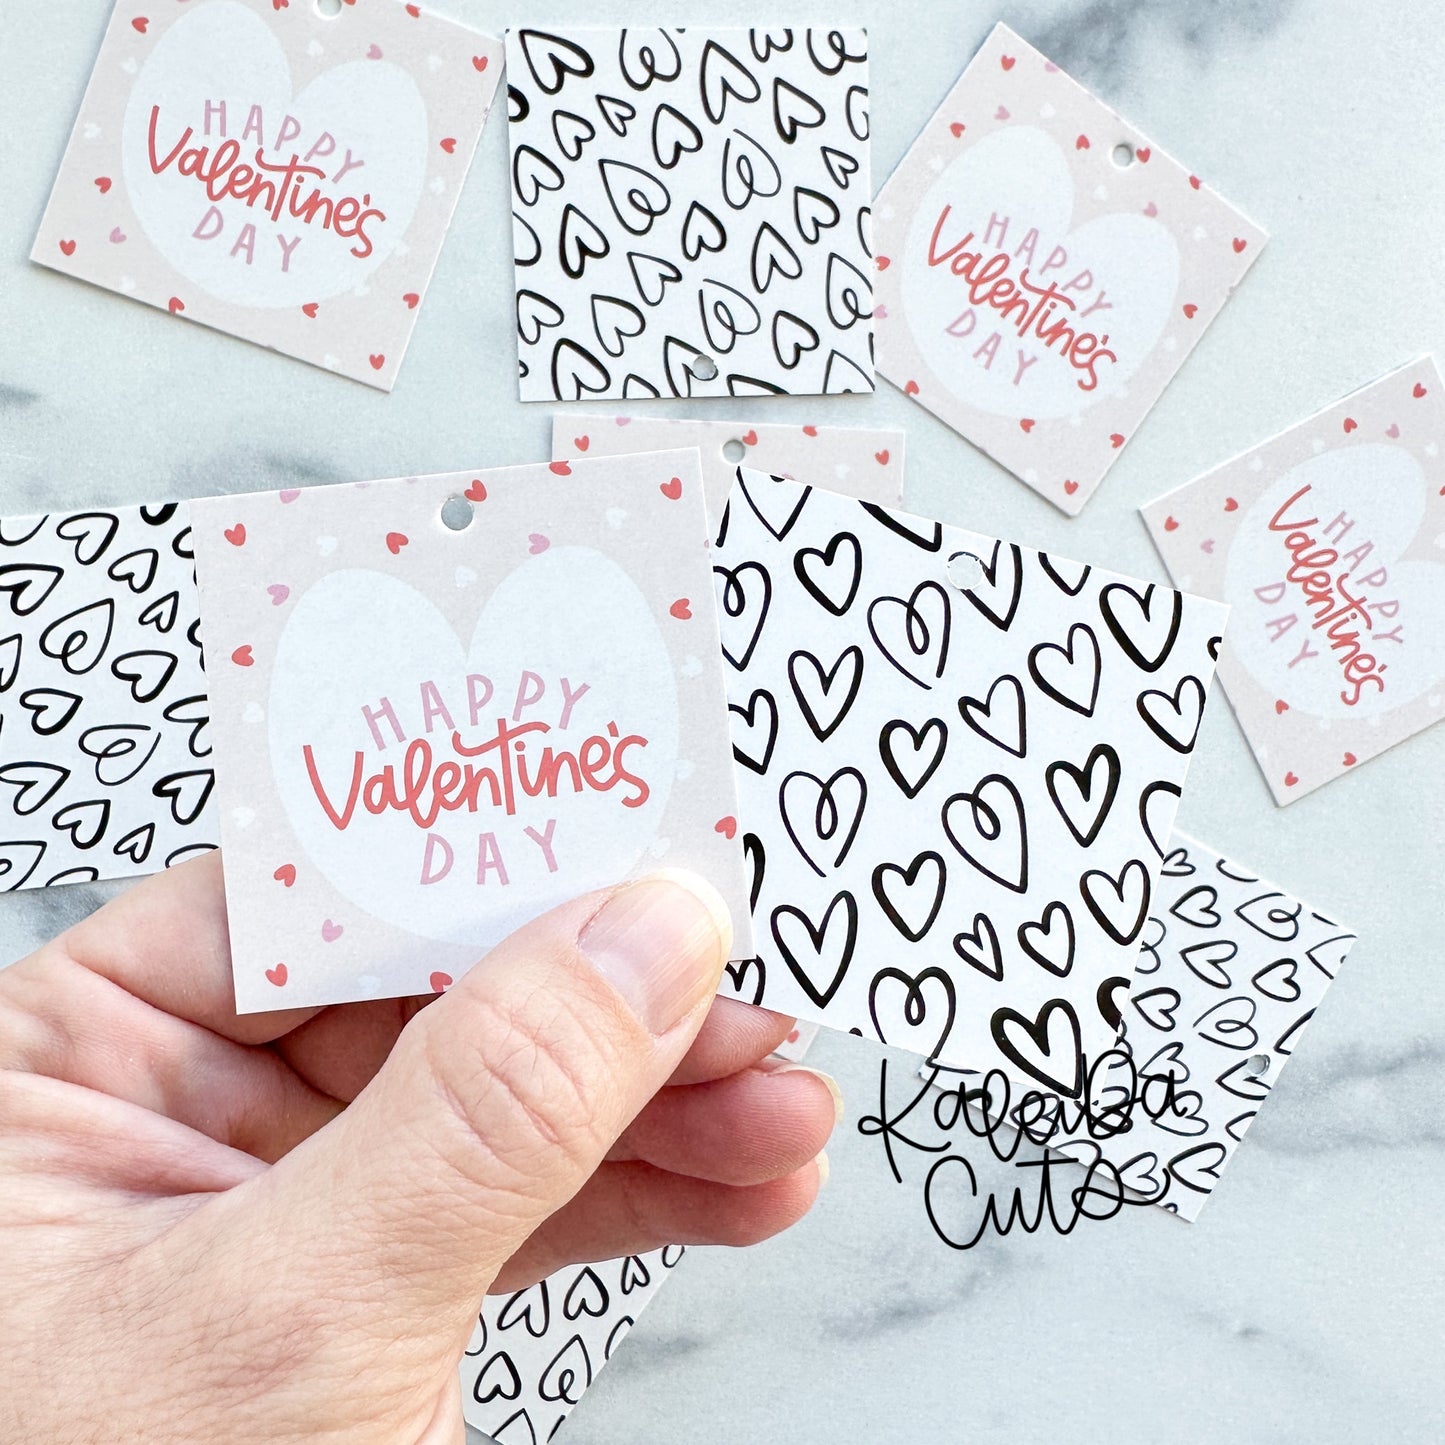 Happy Valentine's Day 2” x 2” Printed Tags: Set of 25